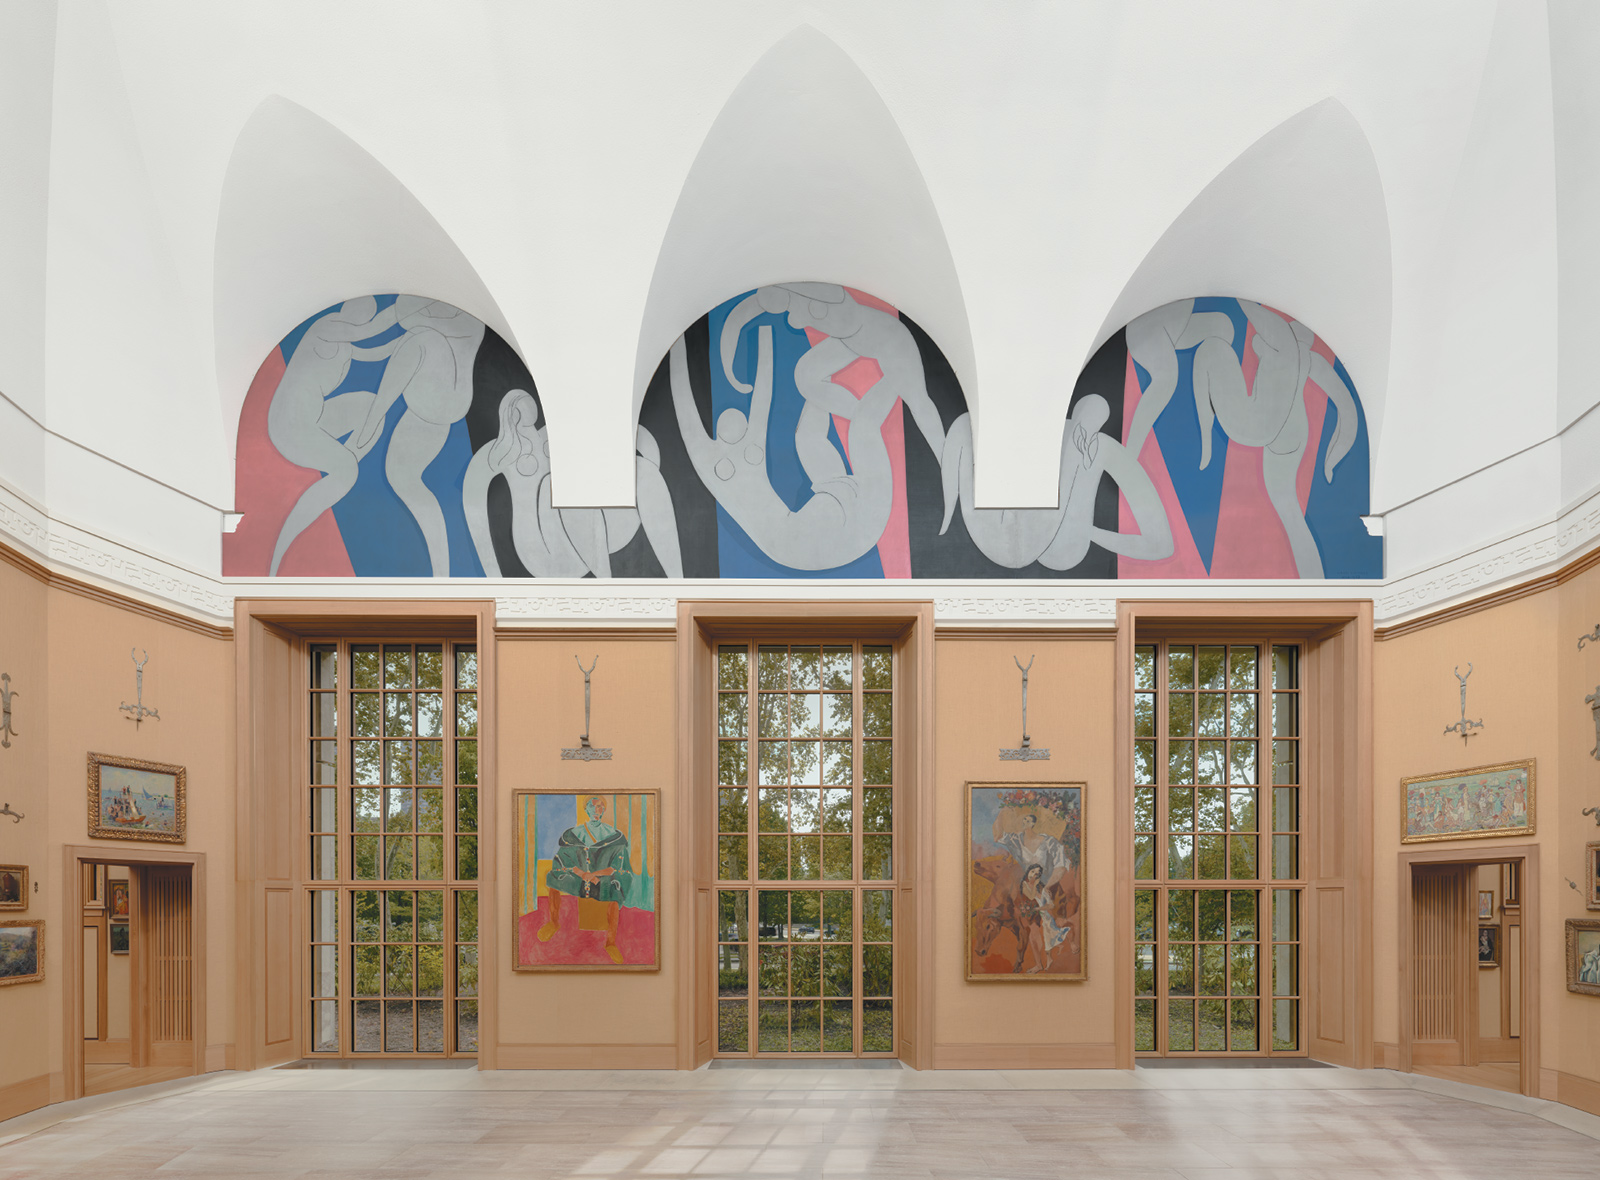 Matisse’s first major mural, The Dance (1932–1933), commissioned by Albert Barnes in 1930 and installed at the new Barnes Foundation museum building in Philadelphia in 2012. Below are works by William James Glackens, Matisse, Picasso, and Maurice Brazil Prendergast.